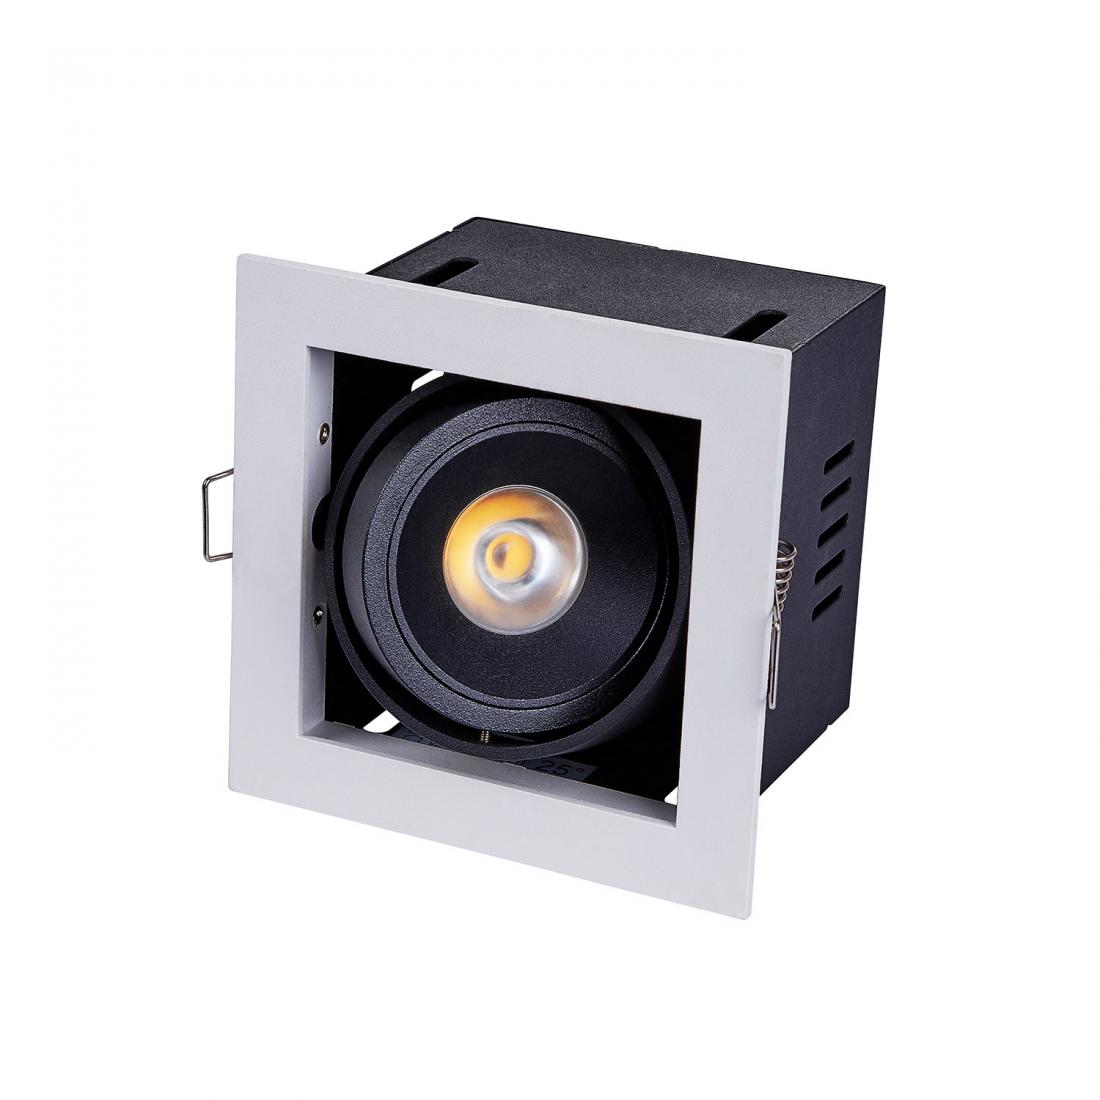 7W adjustable LED recessed square down light